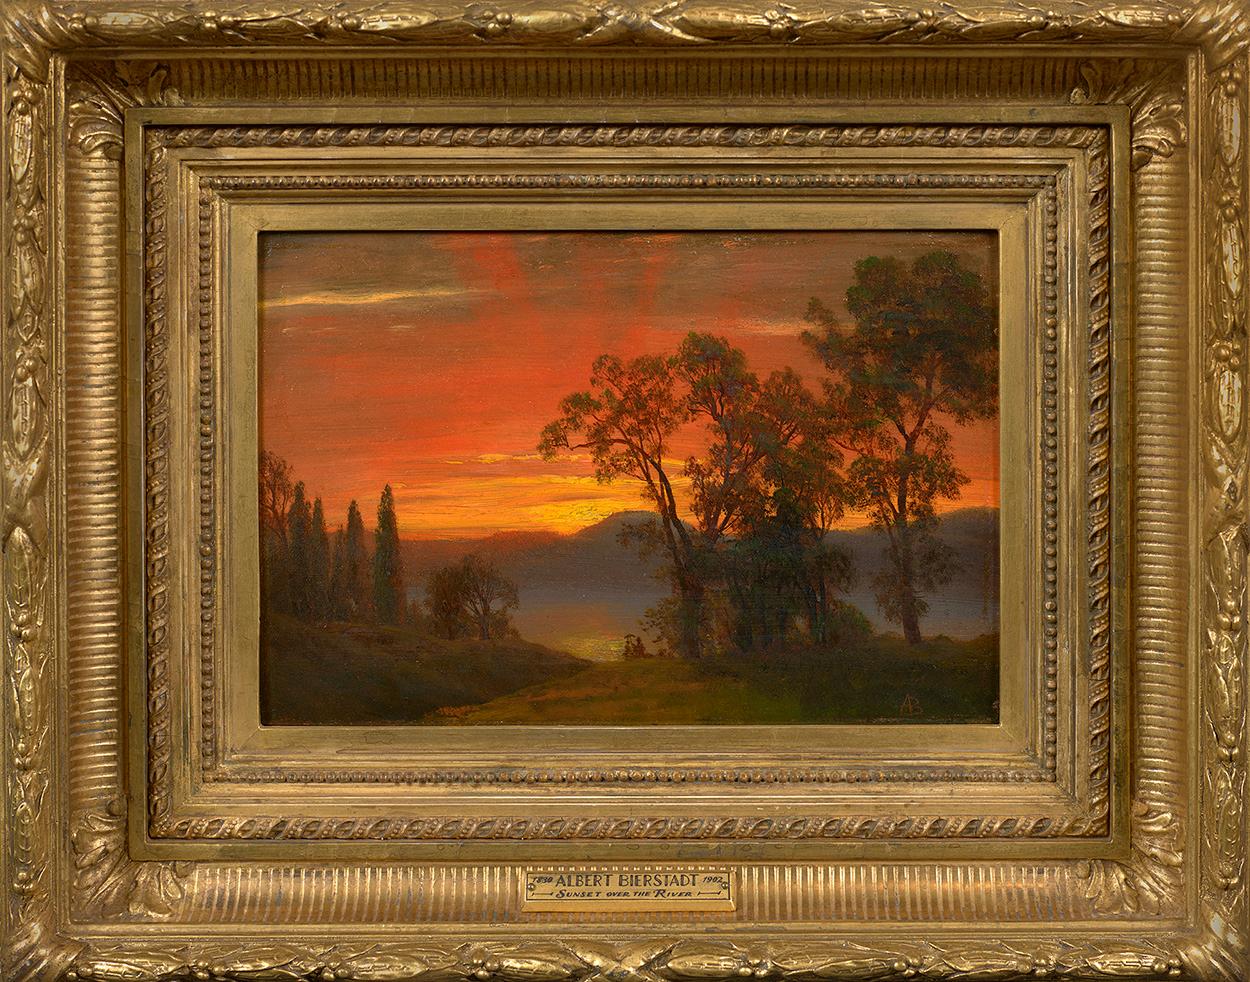 Sunset over the River - Painting by Albert Bierstadt